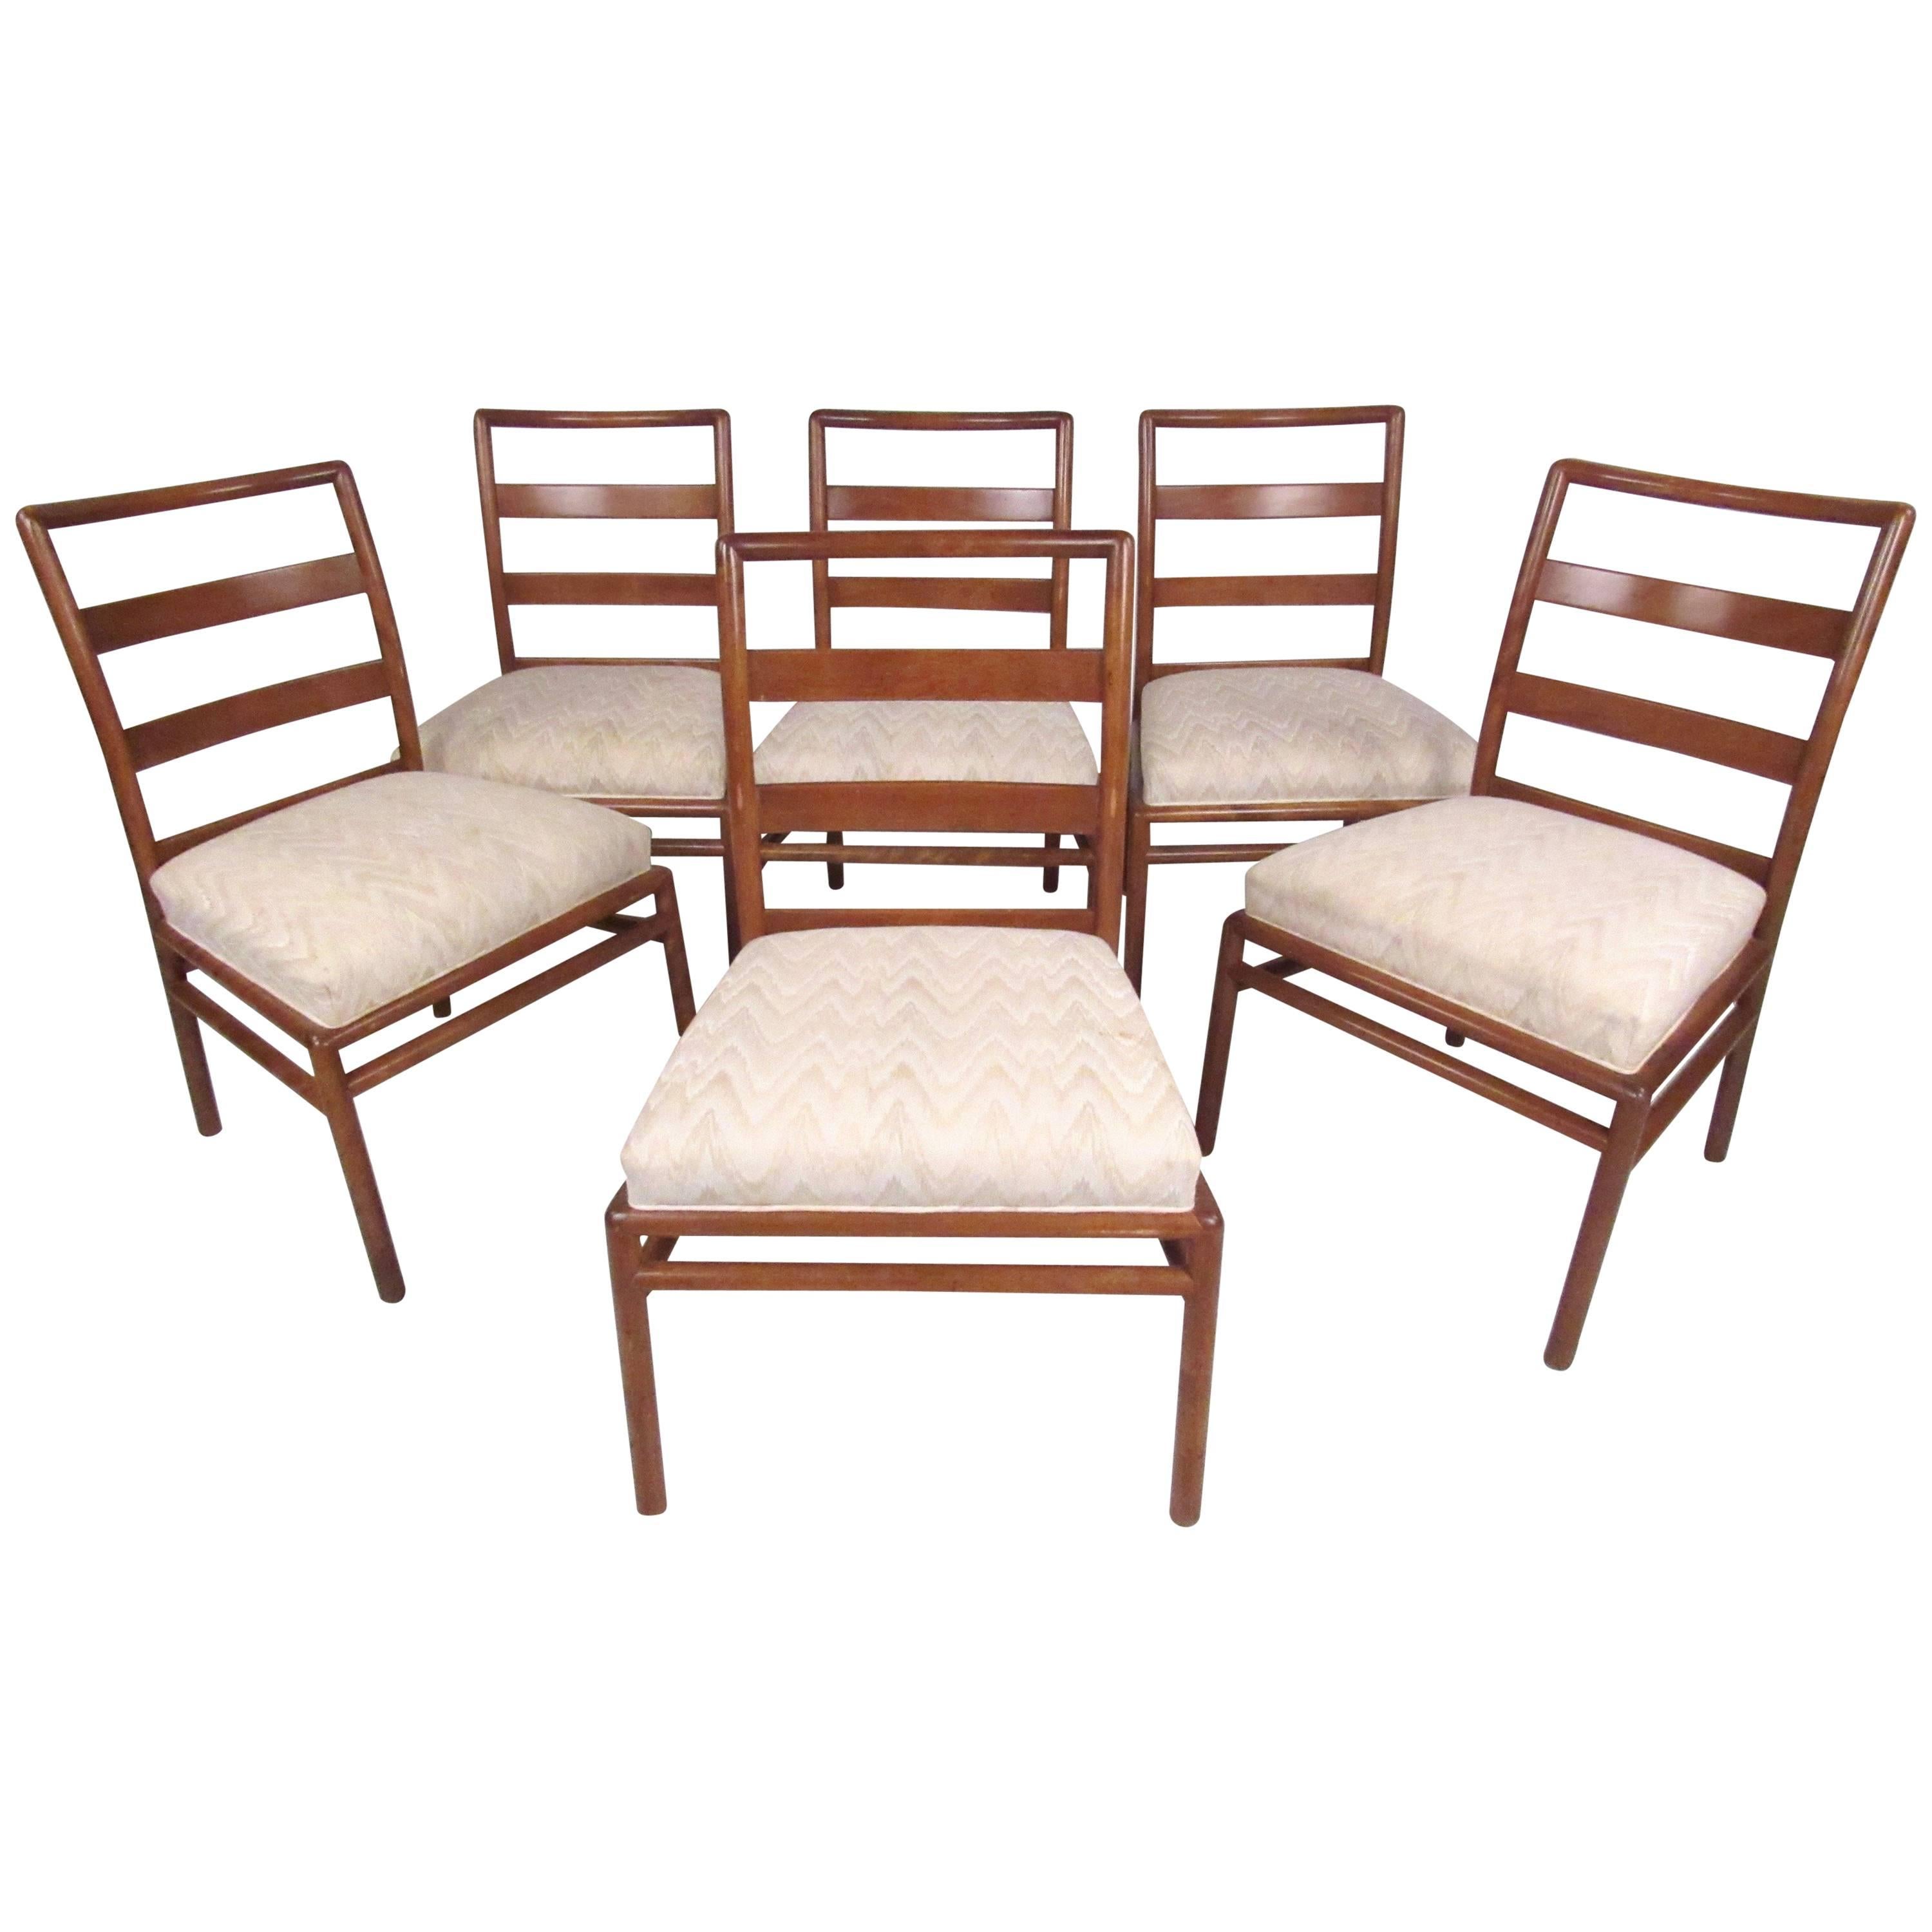 This stylish dining set by Robsjohn-Gibbings includes his iconic x-style base and six matched dining chairs, all featuring unique and sturdy Mid-Century construction. The stylish seat backs and upholstered seats add to both the style and comfort of